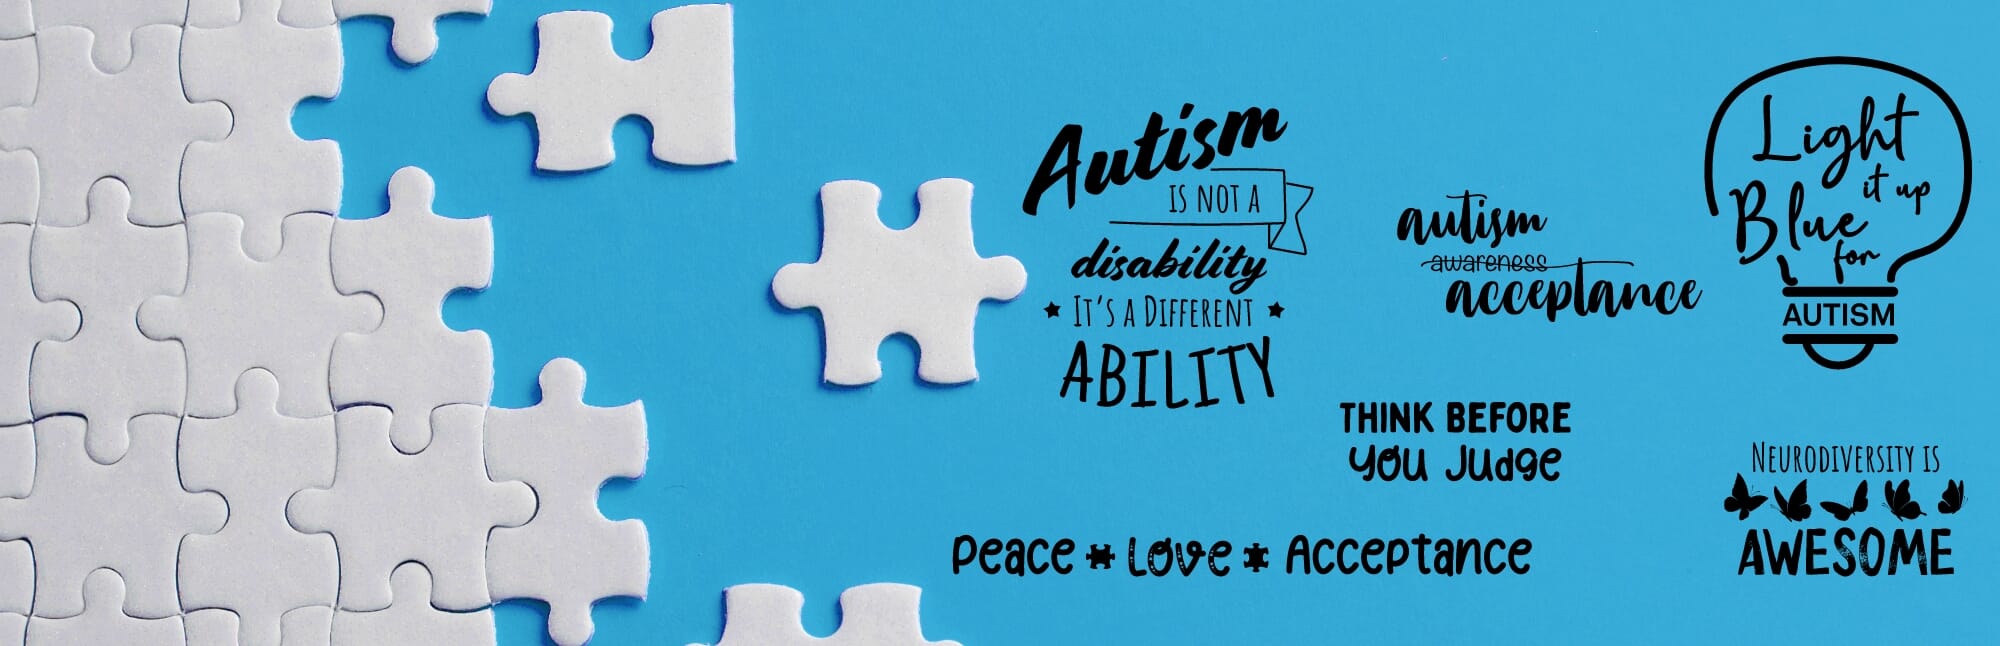 19 Autism Awareness Sayings & T-Shirt Design Ideas to Inspire Acceptance